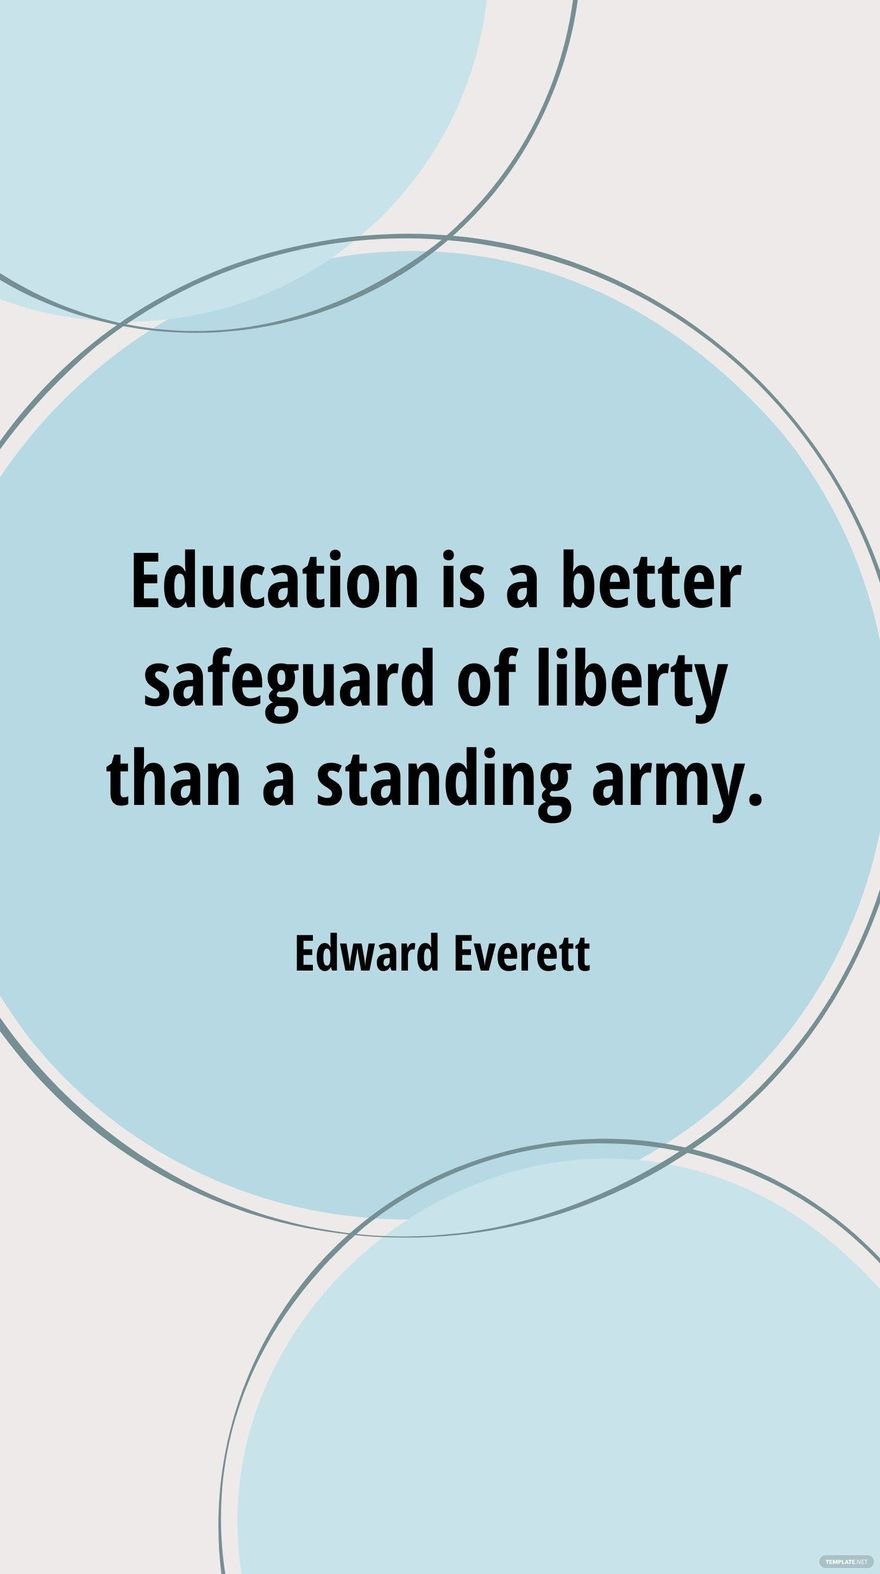 Free Edward Everett - Education is a better safeguard of liberty than a standing army. in JPG